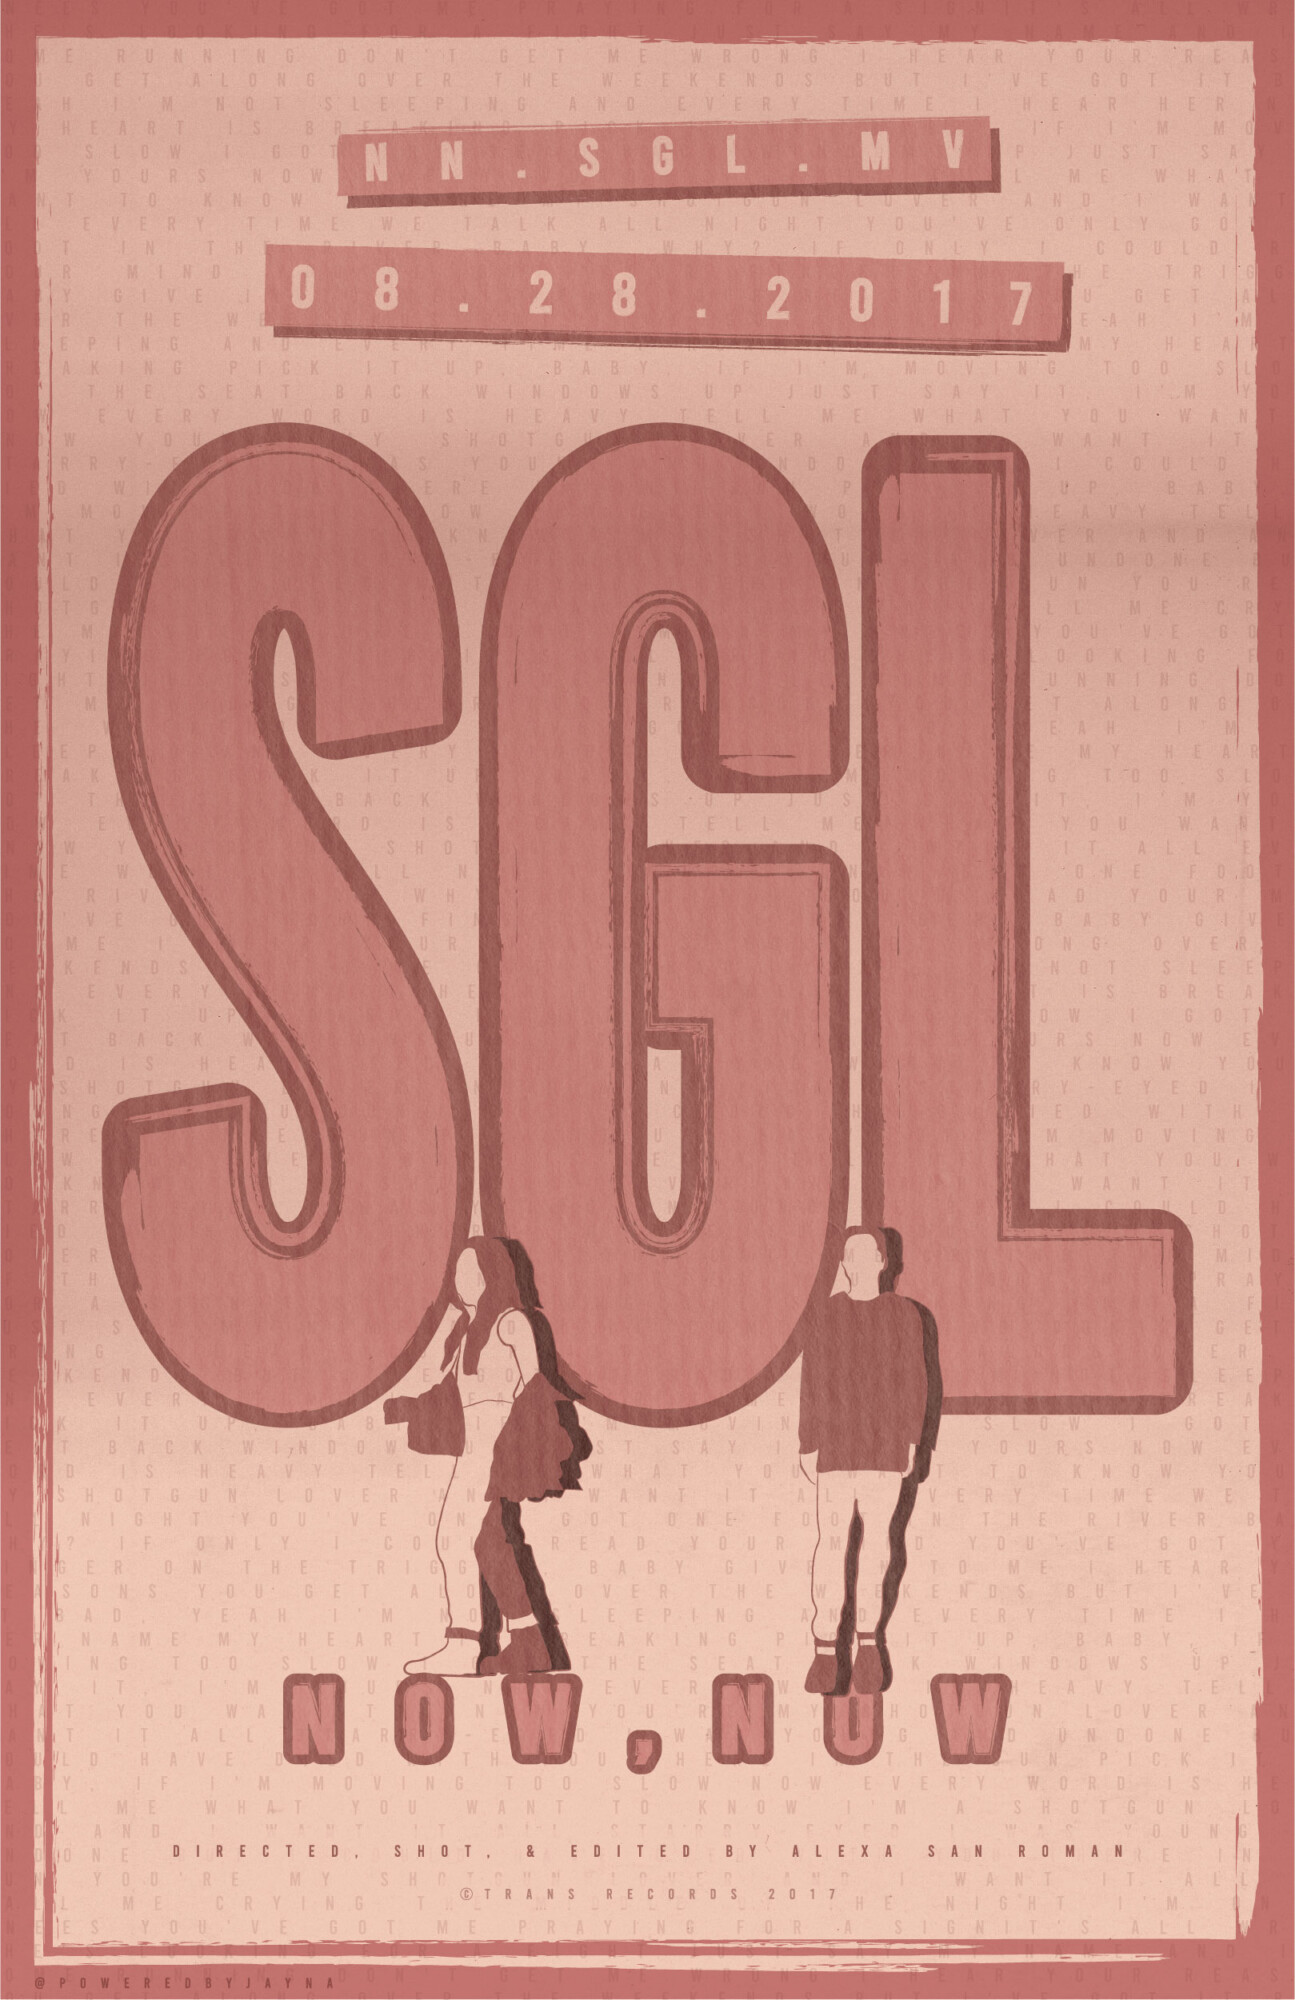 Now, Now – “SGL” Music Video Poster